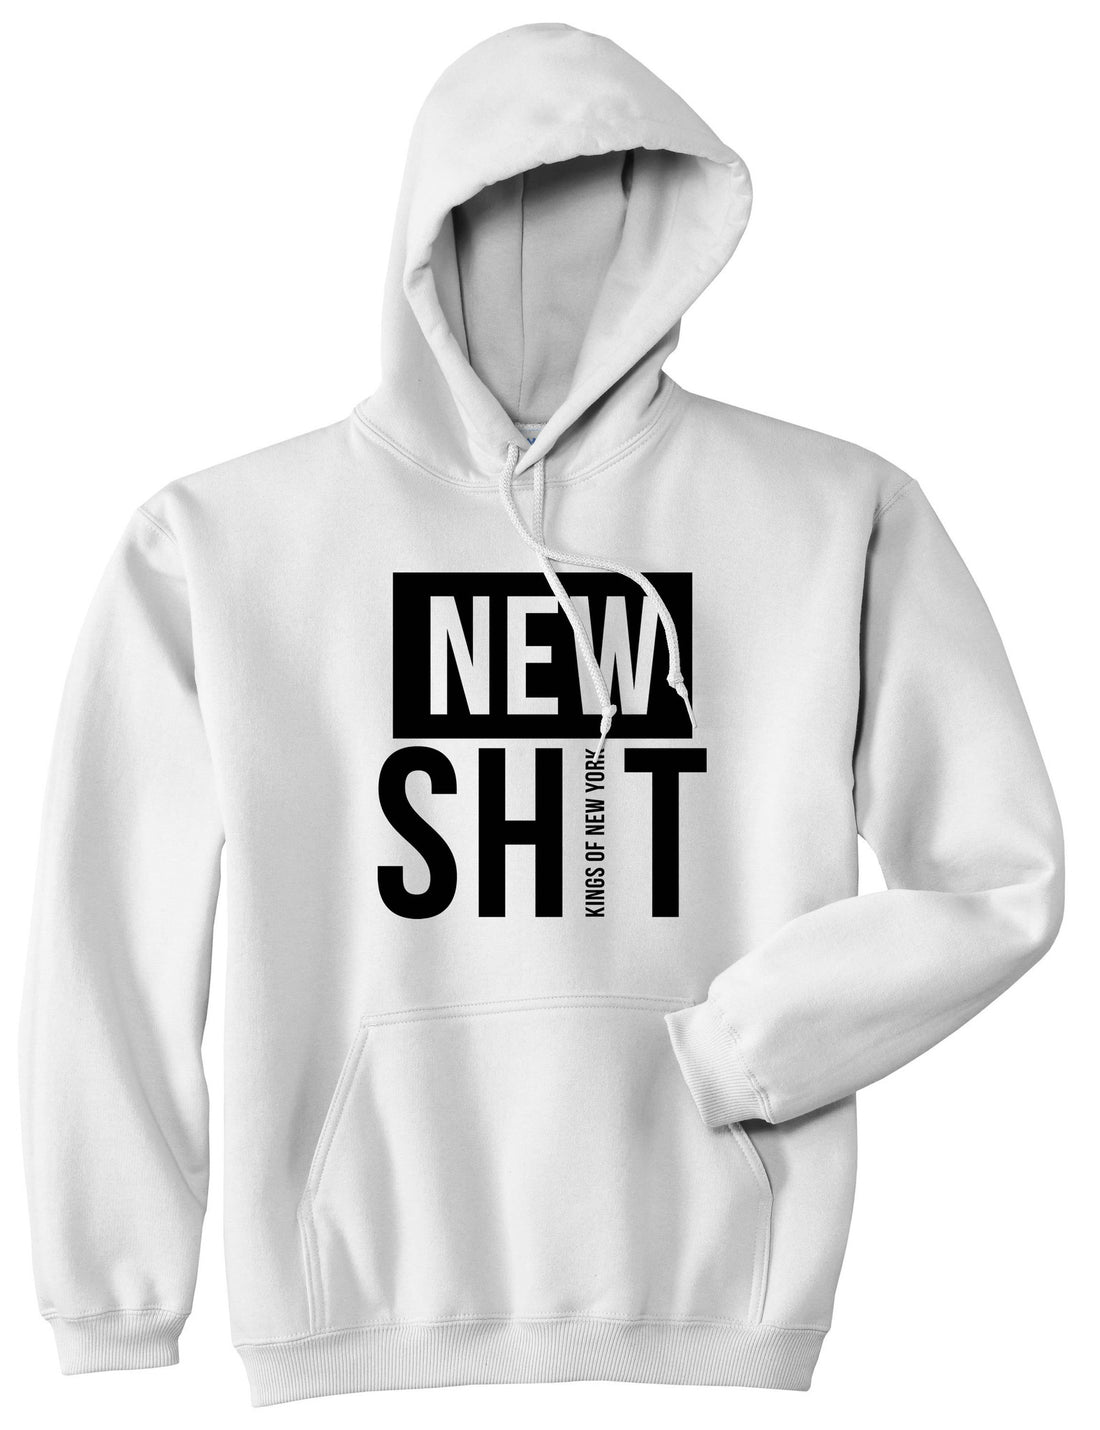 New Shit Pullover Hoodie Hoody in White by Kings Of NY